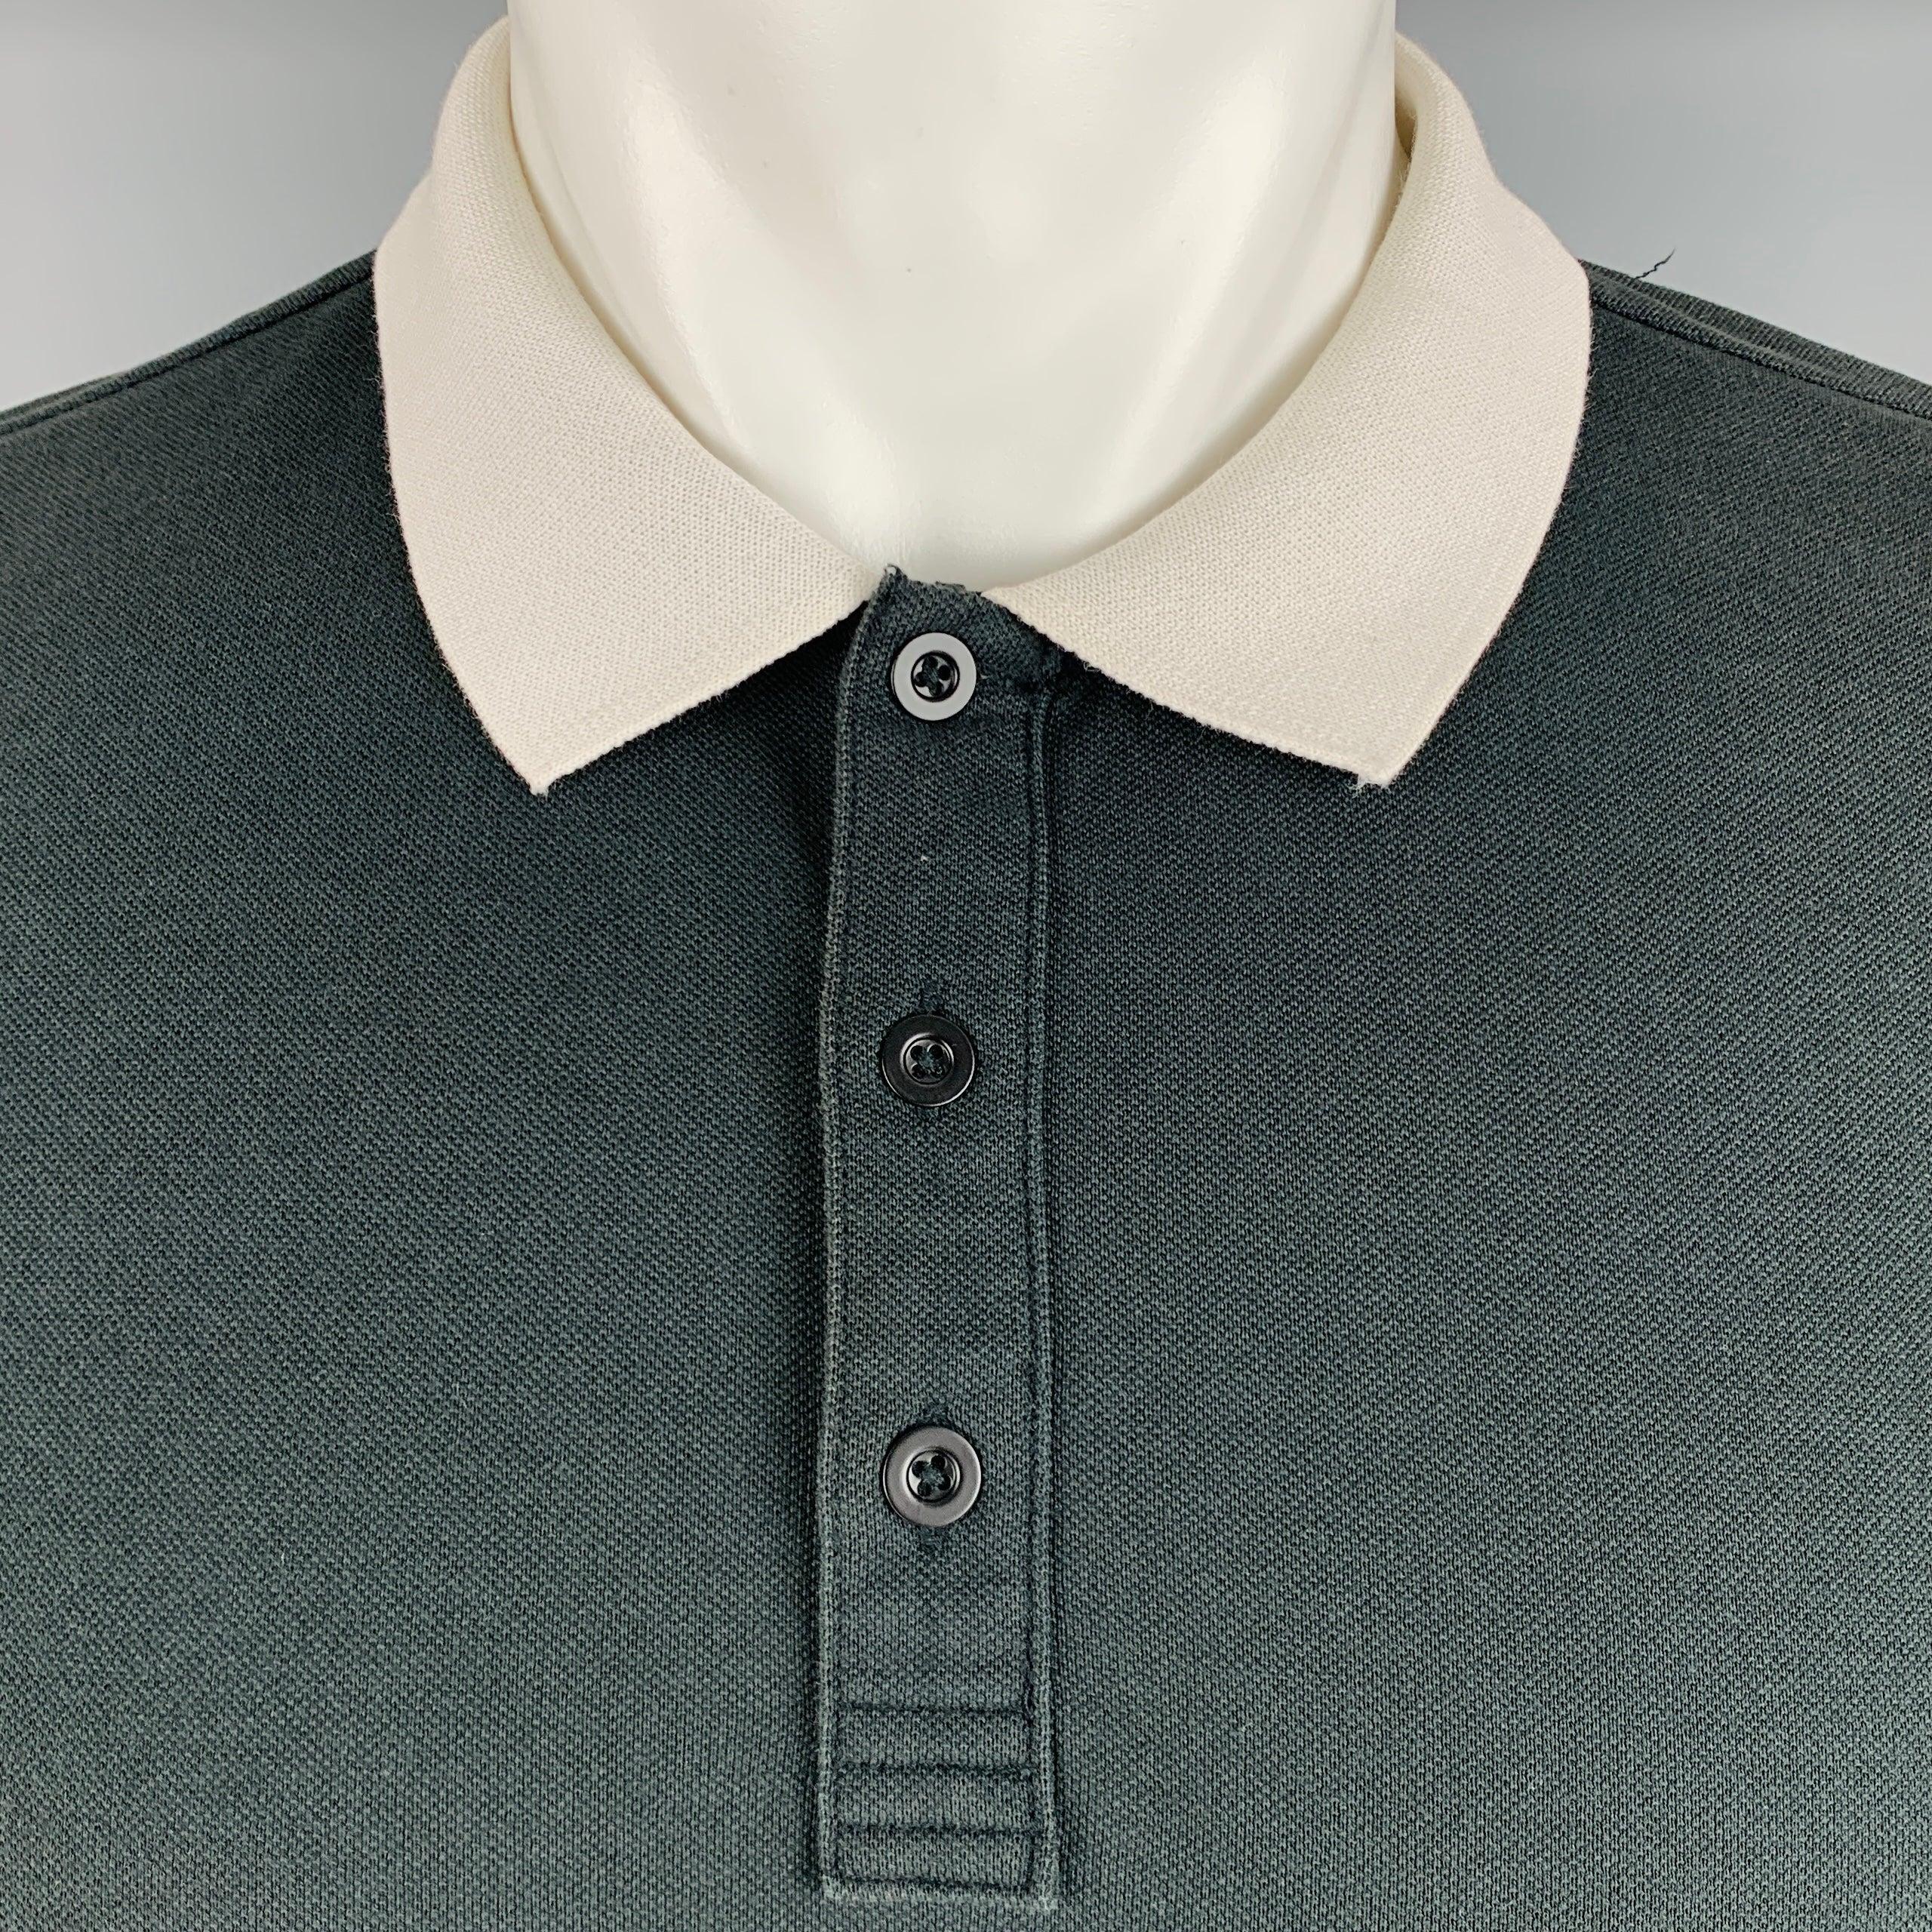 THEORY polo
in a
grey cotton fabric featuring white contrast collar, and half placket button closure.Very Good Pre-Owned Condition. Minor signs of wear. 

Marked:   M 

Measurements: 
 
Shoulder: 16 inches Chest: 39 inches Sleeve: 7.5 inches Length: